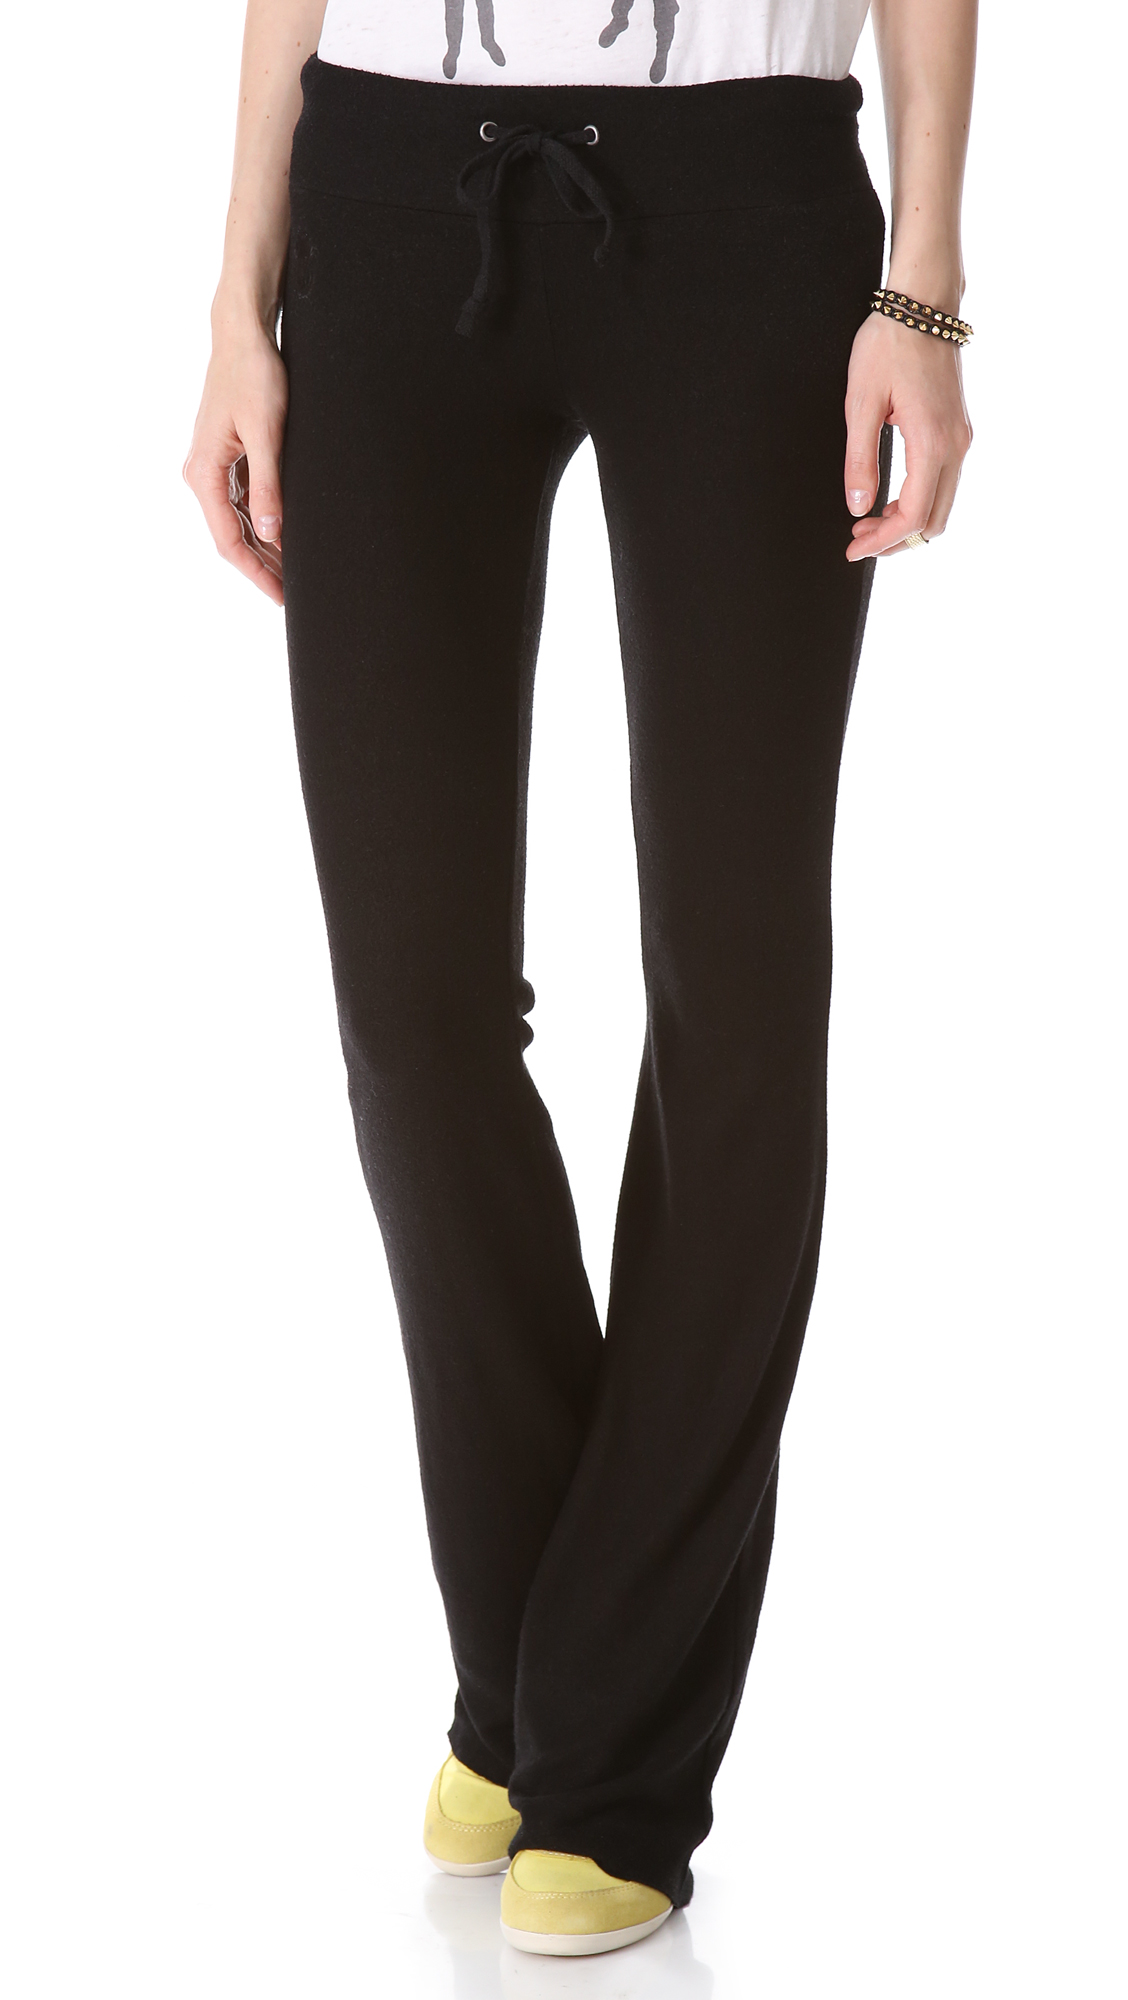 Lyst - Wildfox Basic Flare Sweatpants in Black - Save 50%